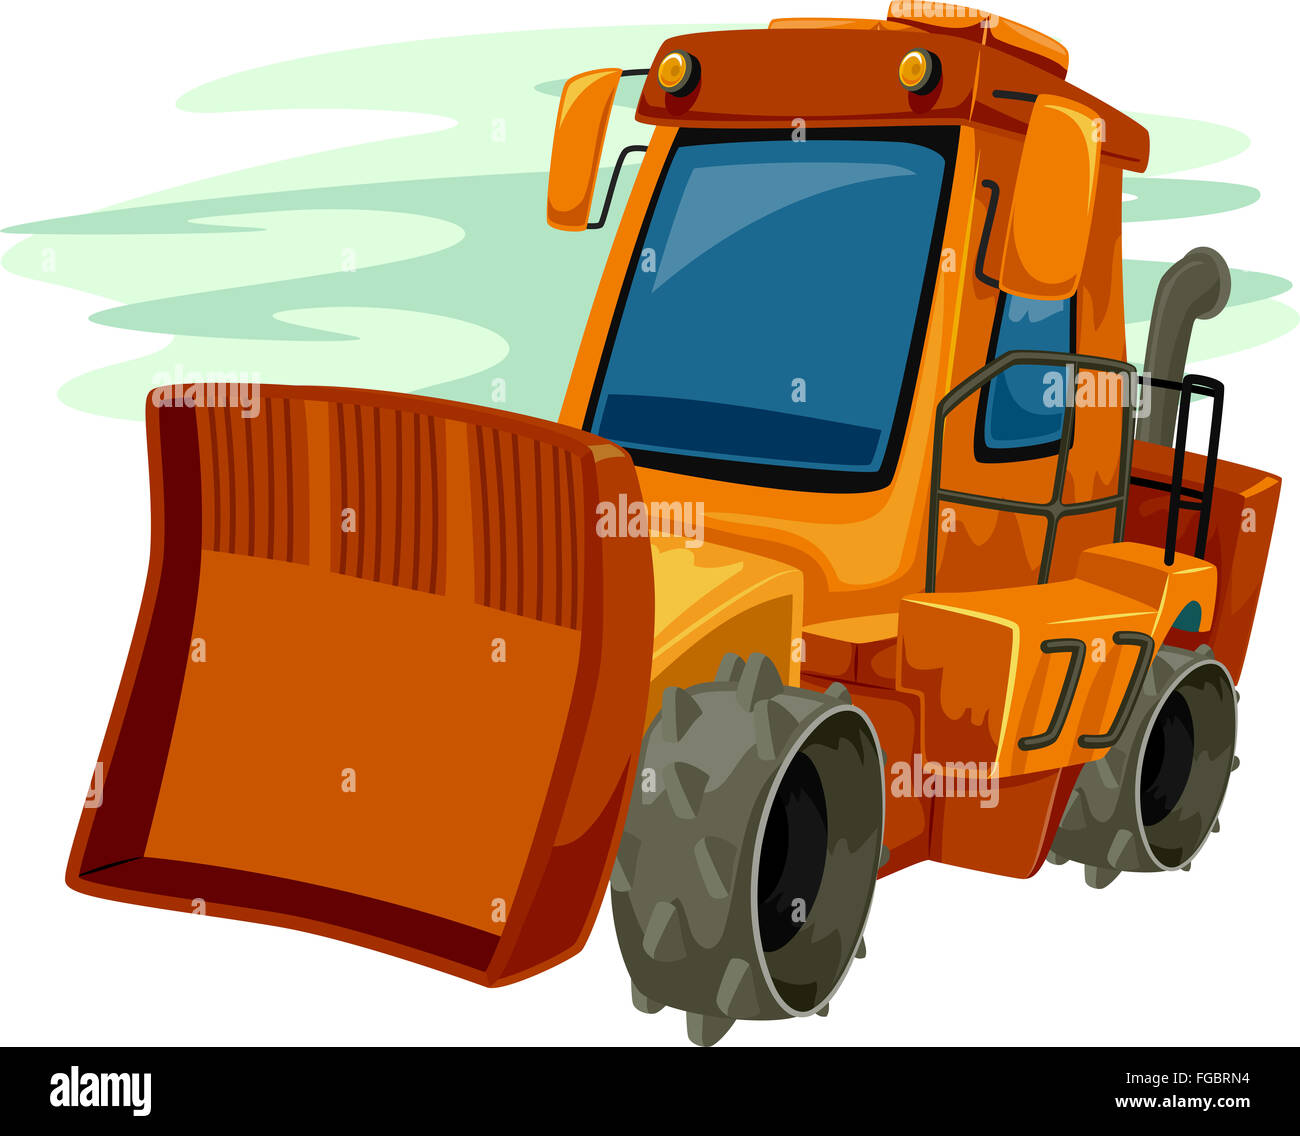 Illustration of a Bulldozer in a Parking Lot Ready to be Used Stock Photo